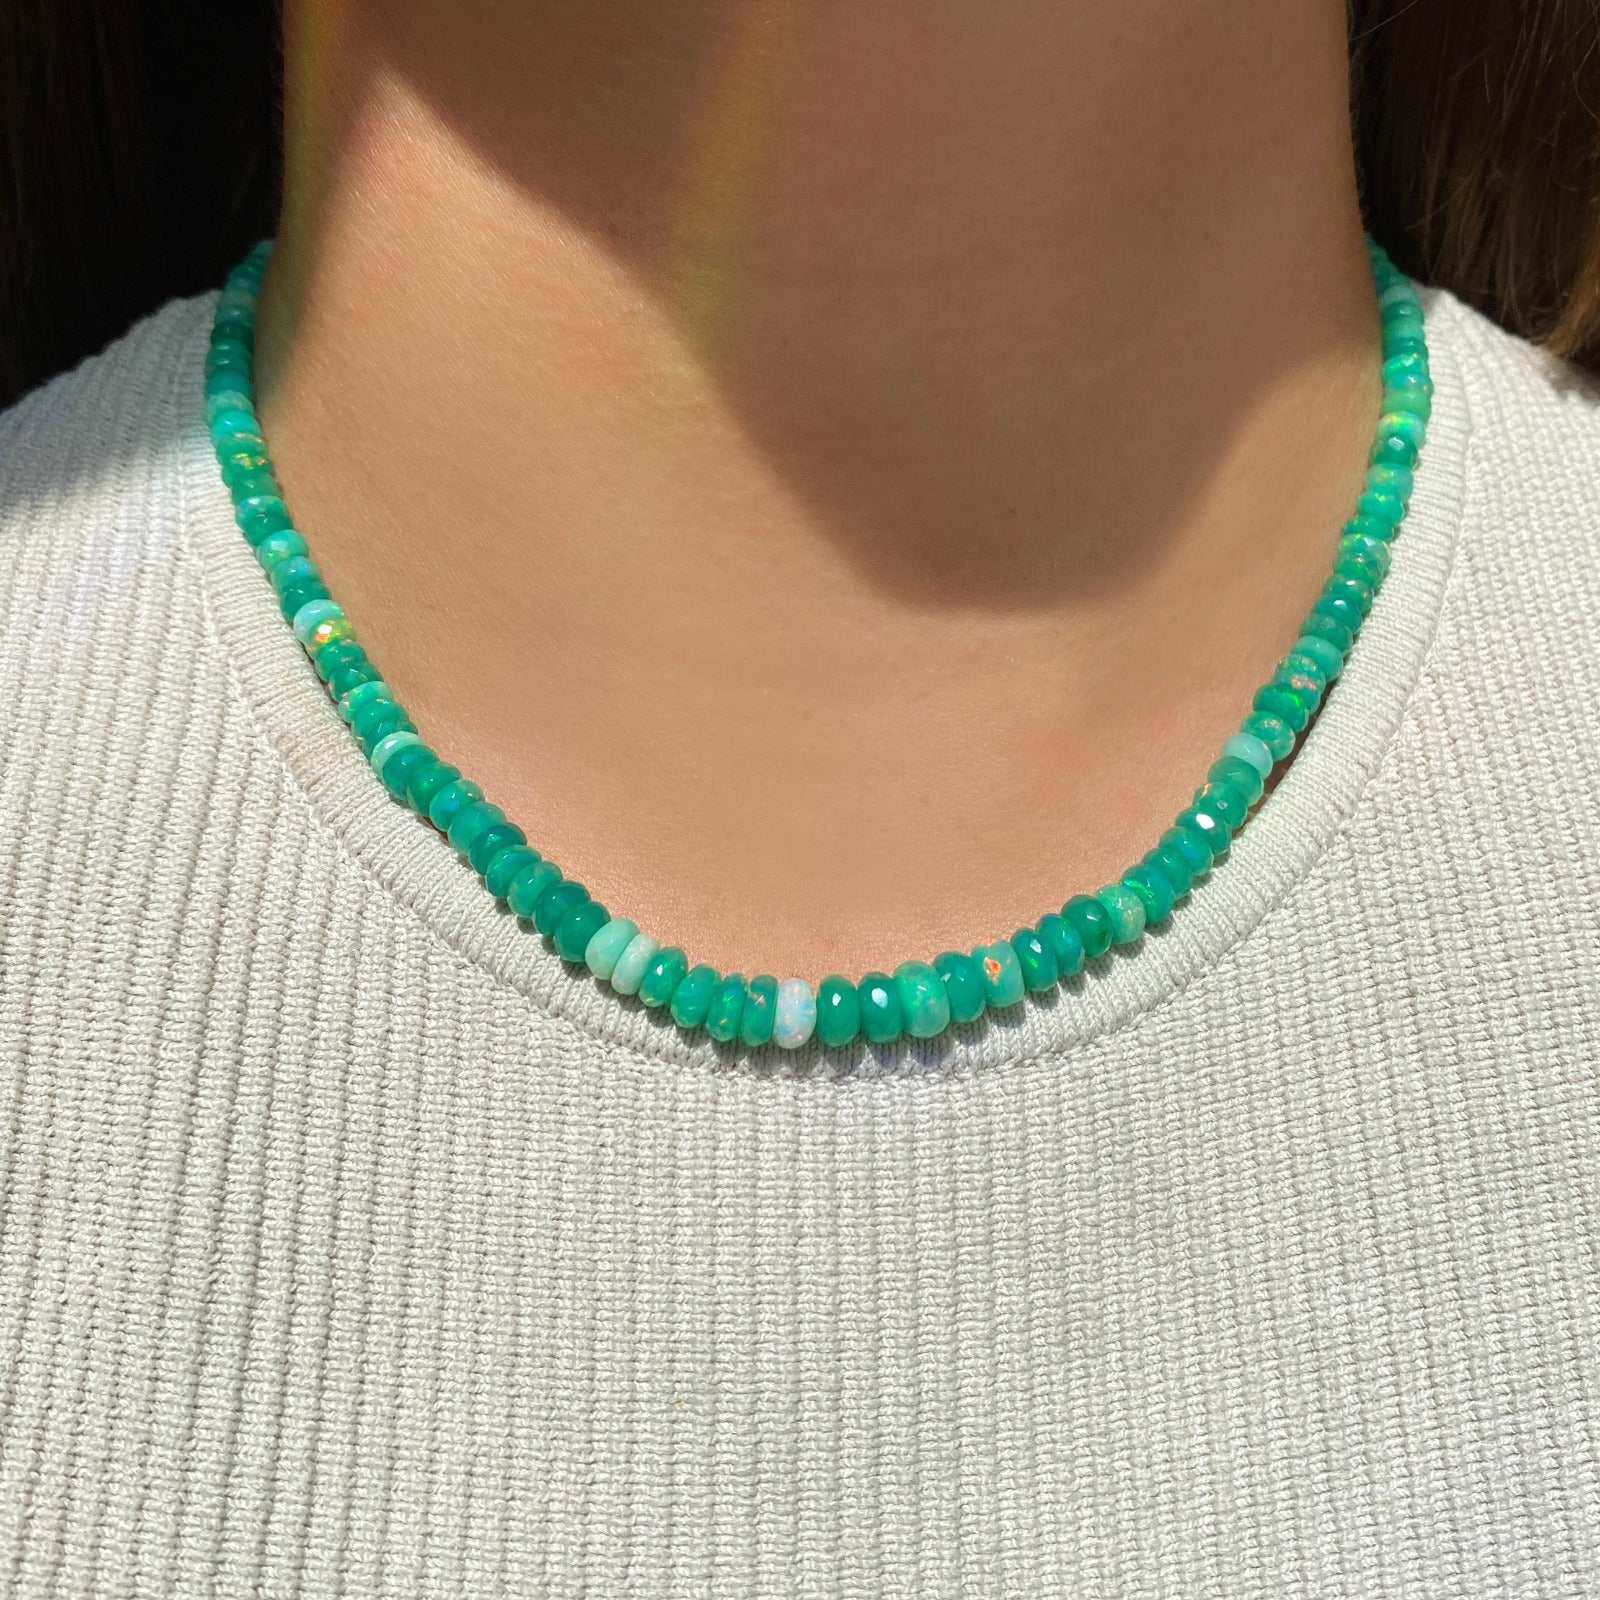 Shimmering beaded necklace made of faceted opals in shades of green on a gold linking ovals clasp.